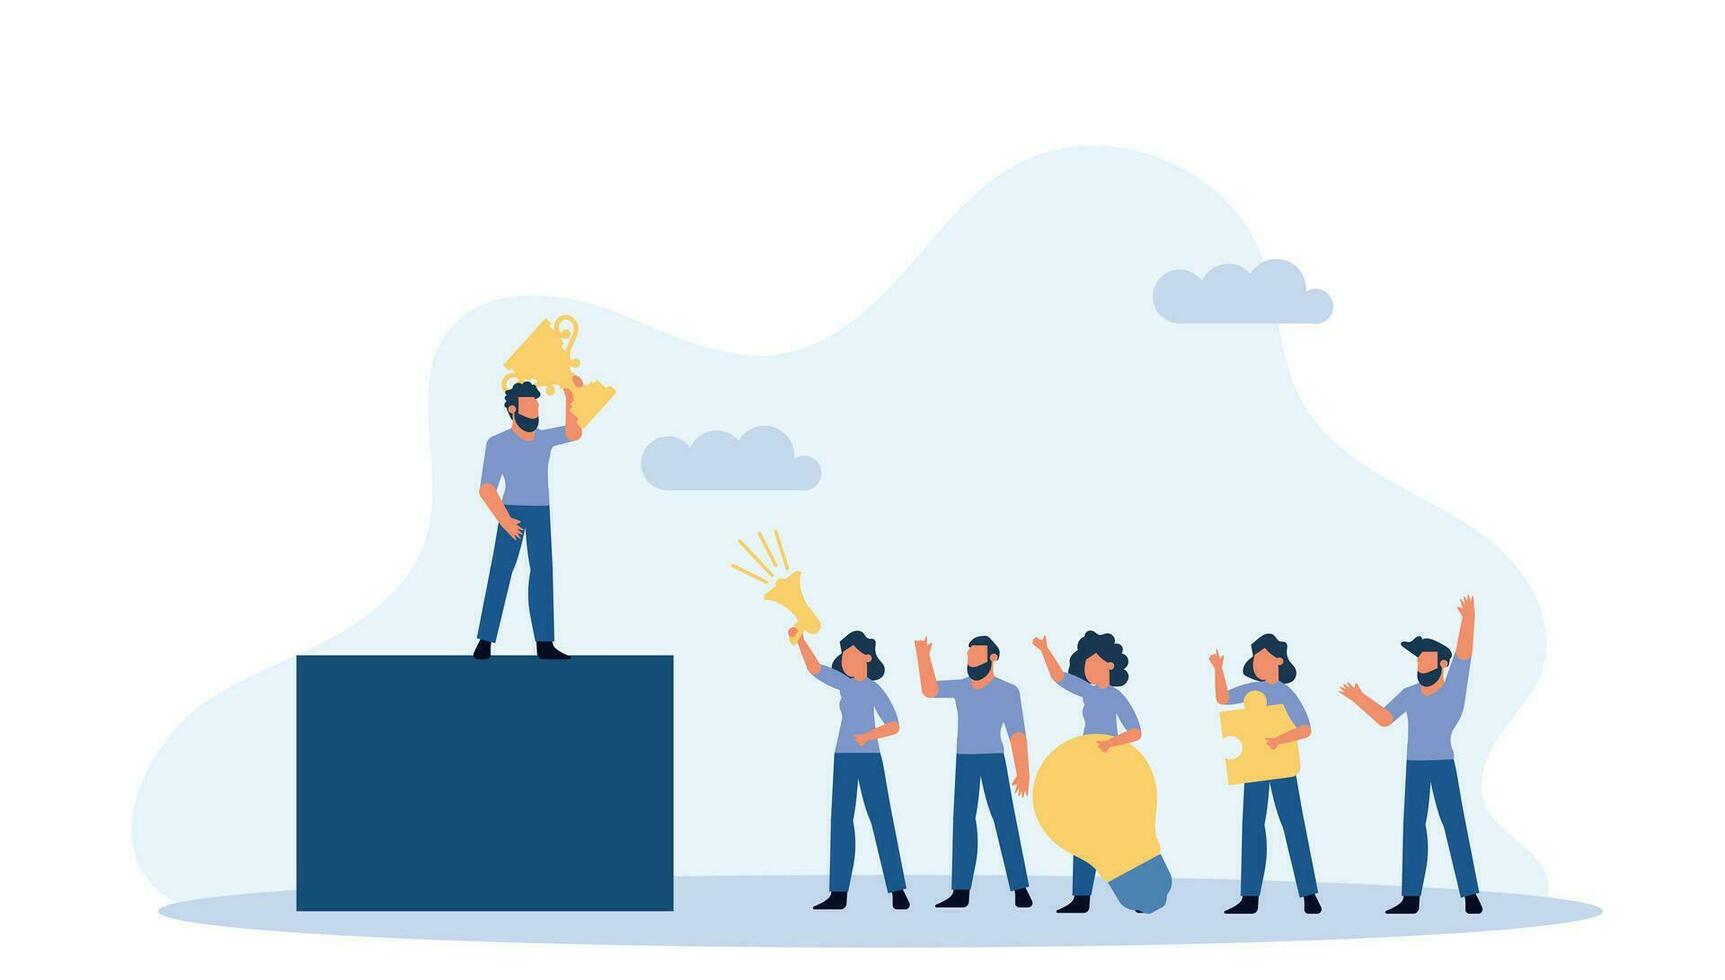 Diverse group of people standing on a podium, holding trophies and puzzles. They are all smiling and excited, celebrating their success as a team. Vector illustration